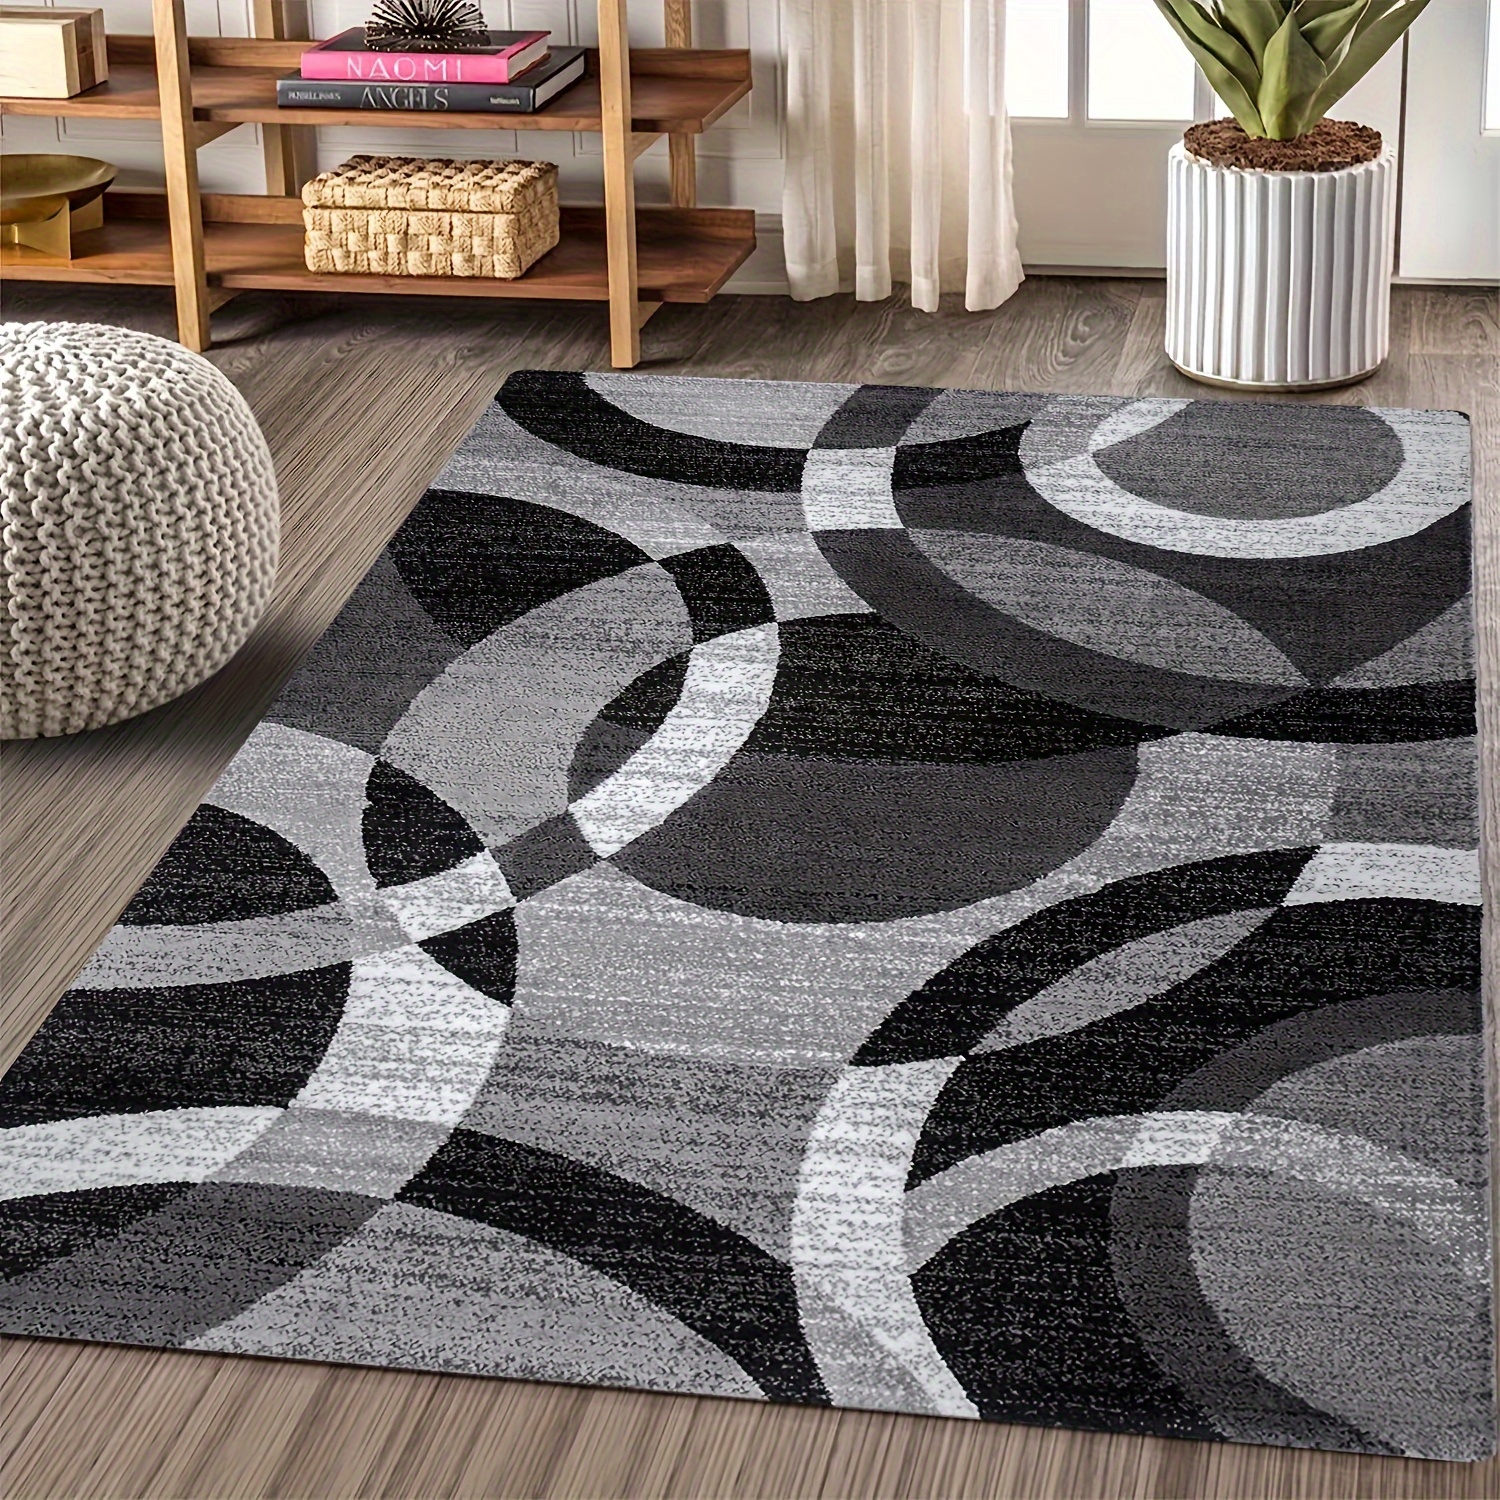 

Modern Geometric Circle Print Area Rug, Non-slip Backing, Machine Washable, Low Pile, Lightweight, Rectangular Polyester Carpet For Bedroom, Office, And Game Room Decor - 47x62 Inch (120x160cm)